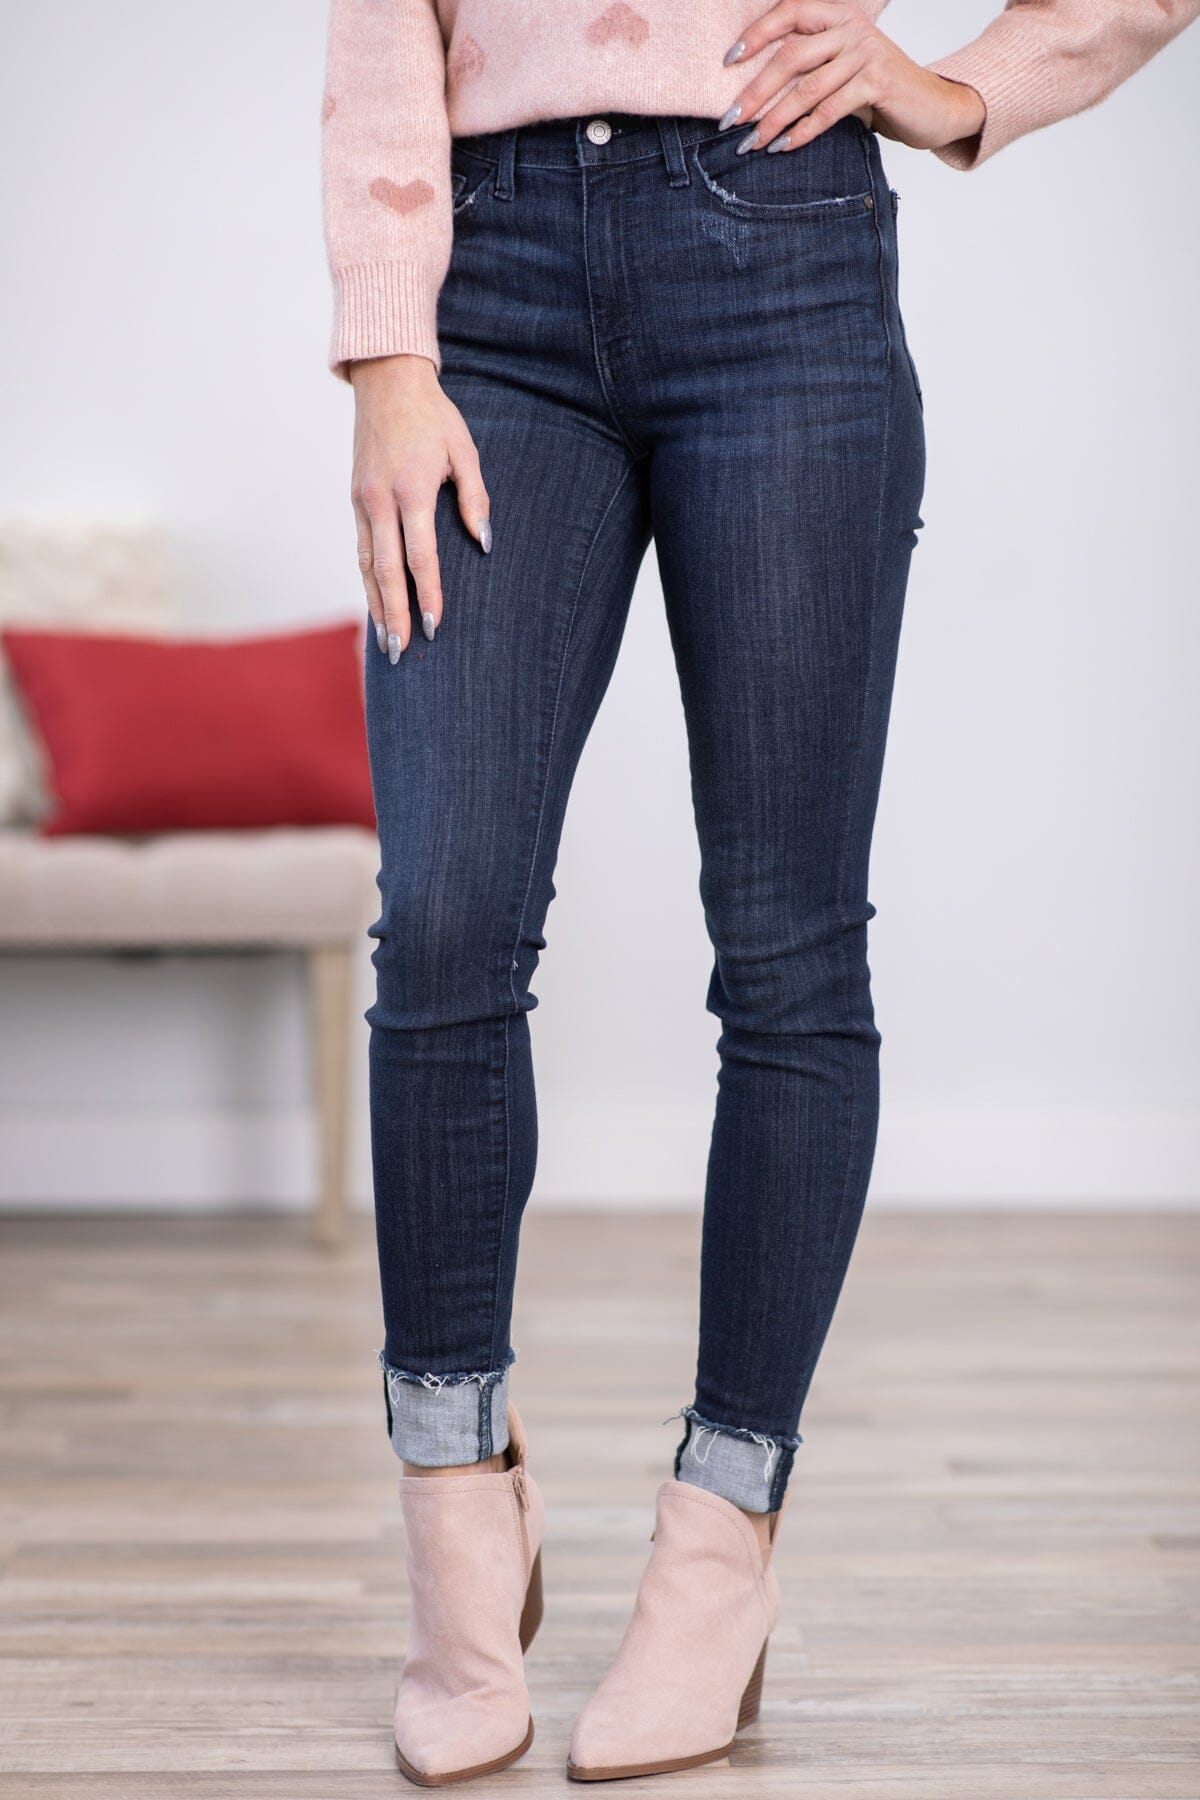 3 Ways to Wear Ankle Boots with Jeans - wikiHow